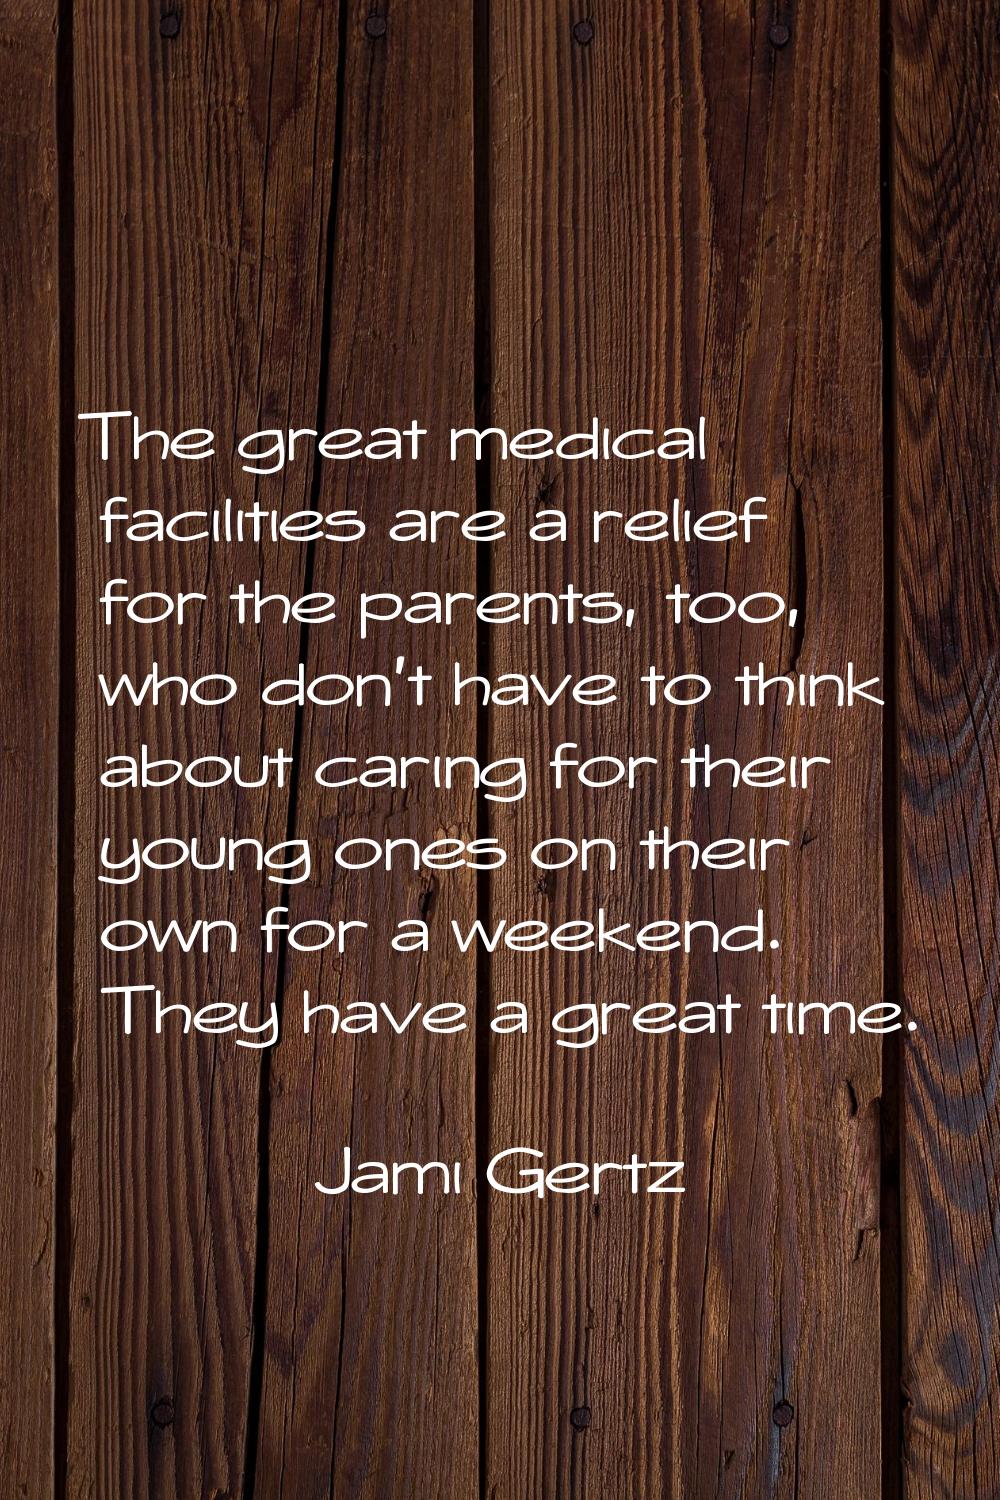 The great medical facilities are a relief for the parents, too, who don't have to think about carin